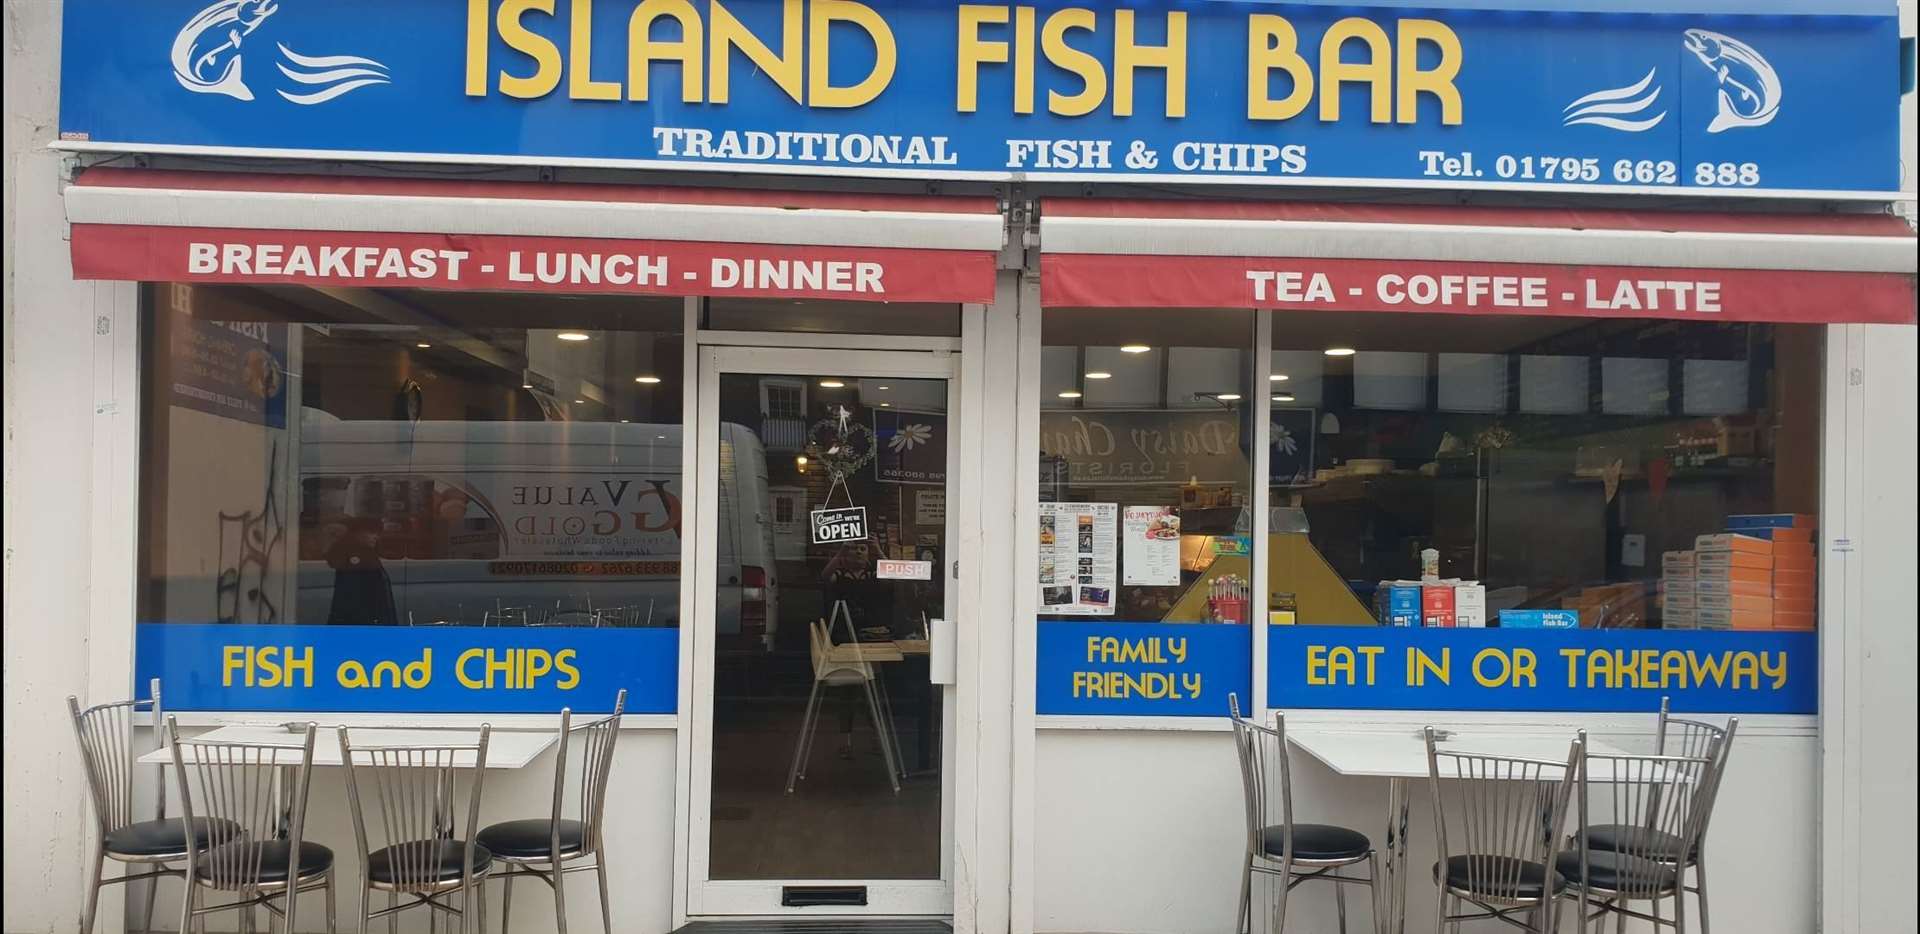 Island Fish Bar, fish and chips shop based in Sheerness, says it hopes for a better future